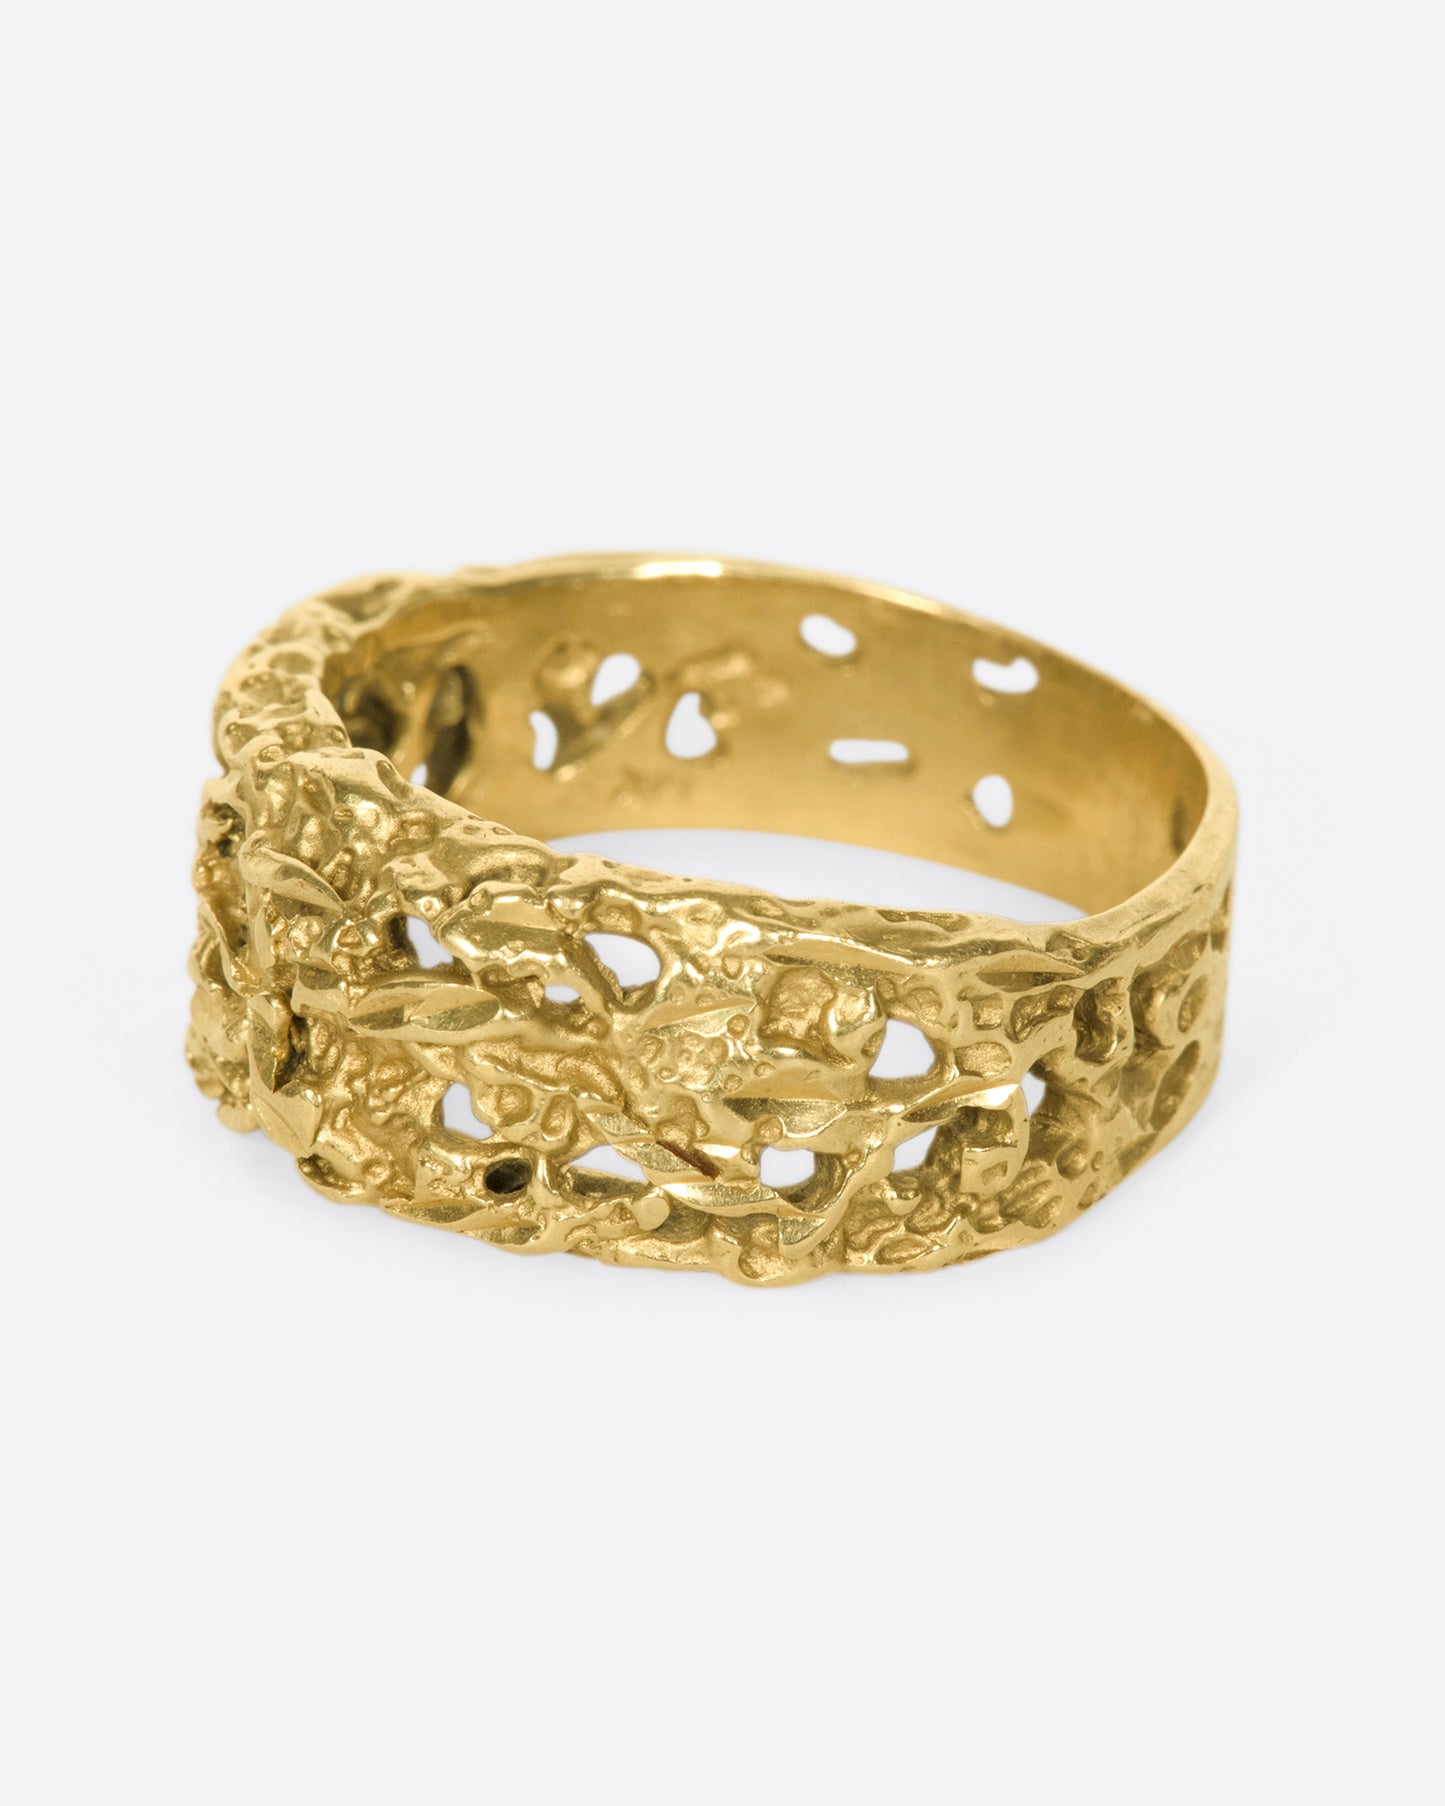 The cutouts on this ring almost look like the gold has eroded away, leaving little windows.